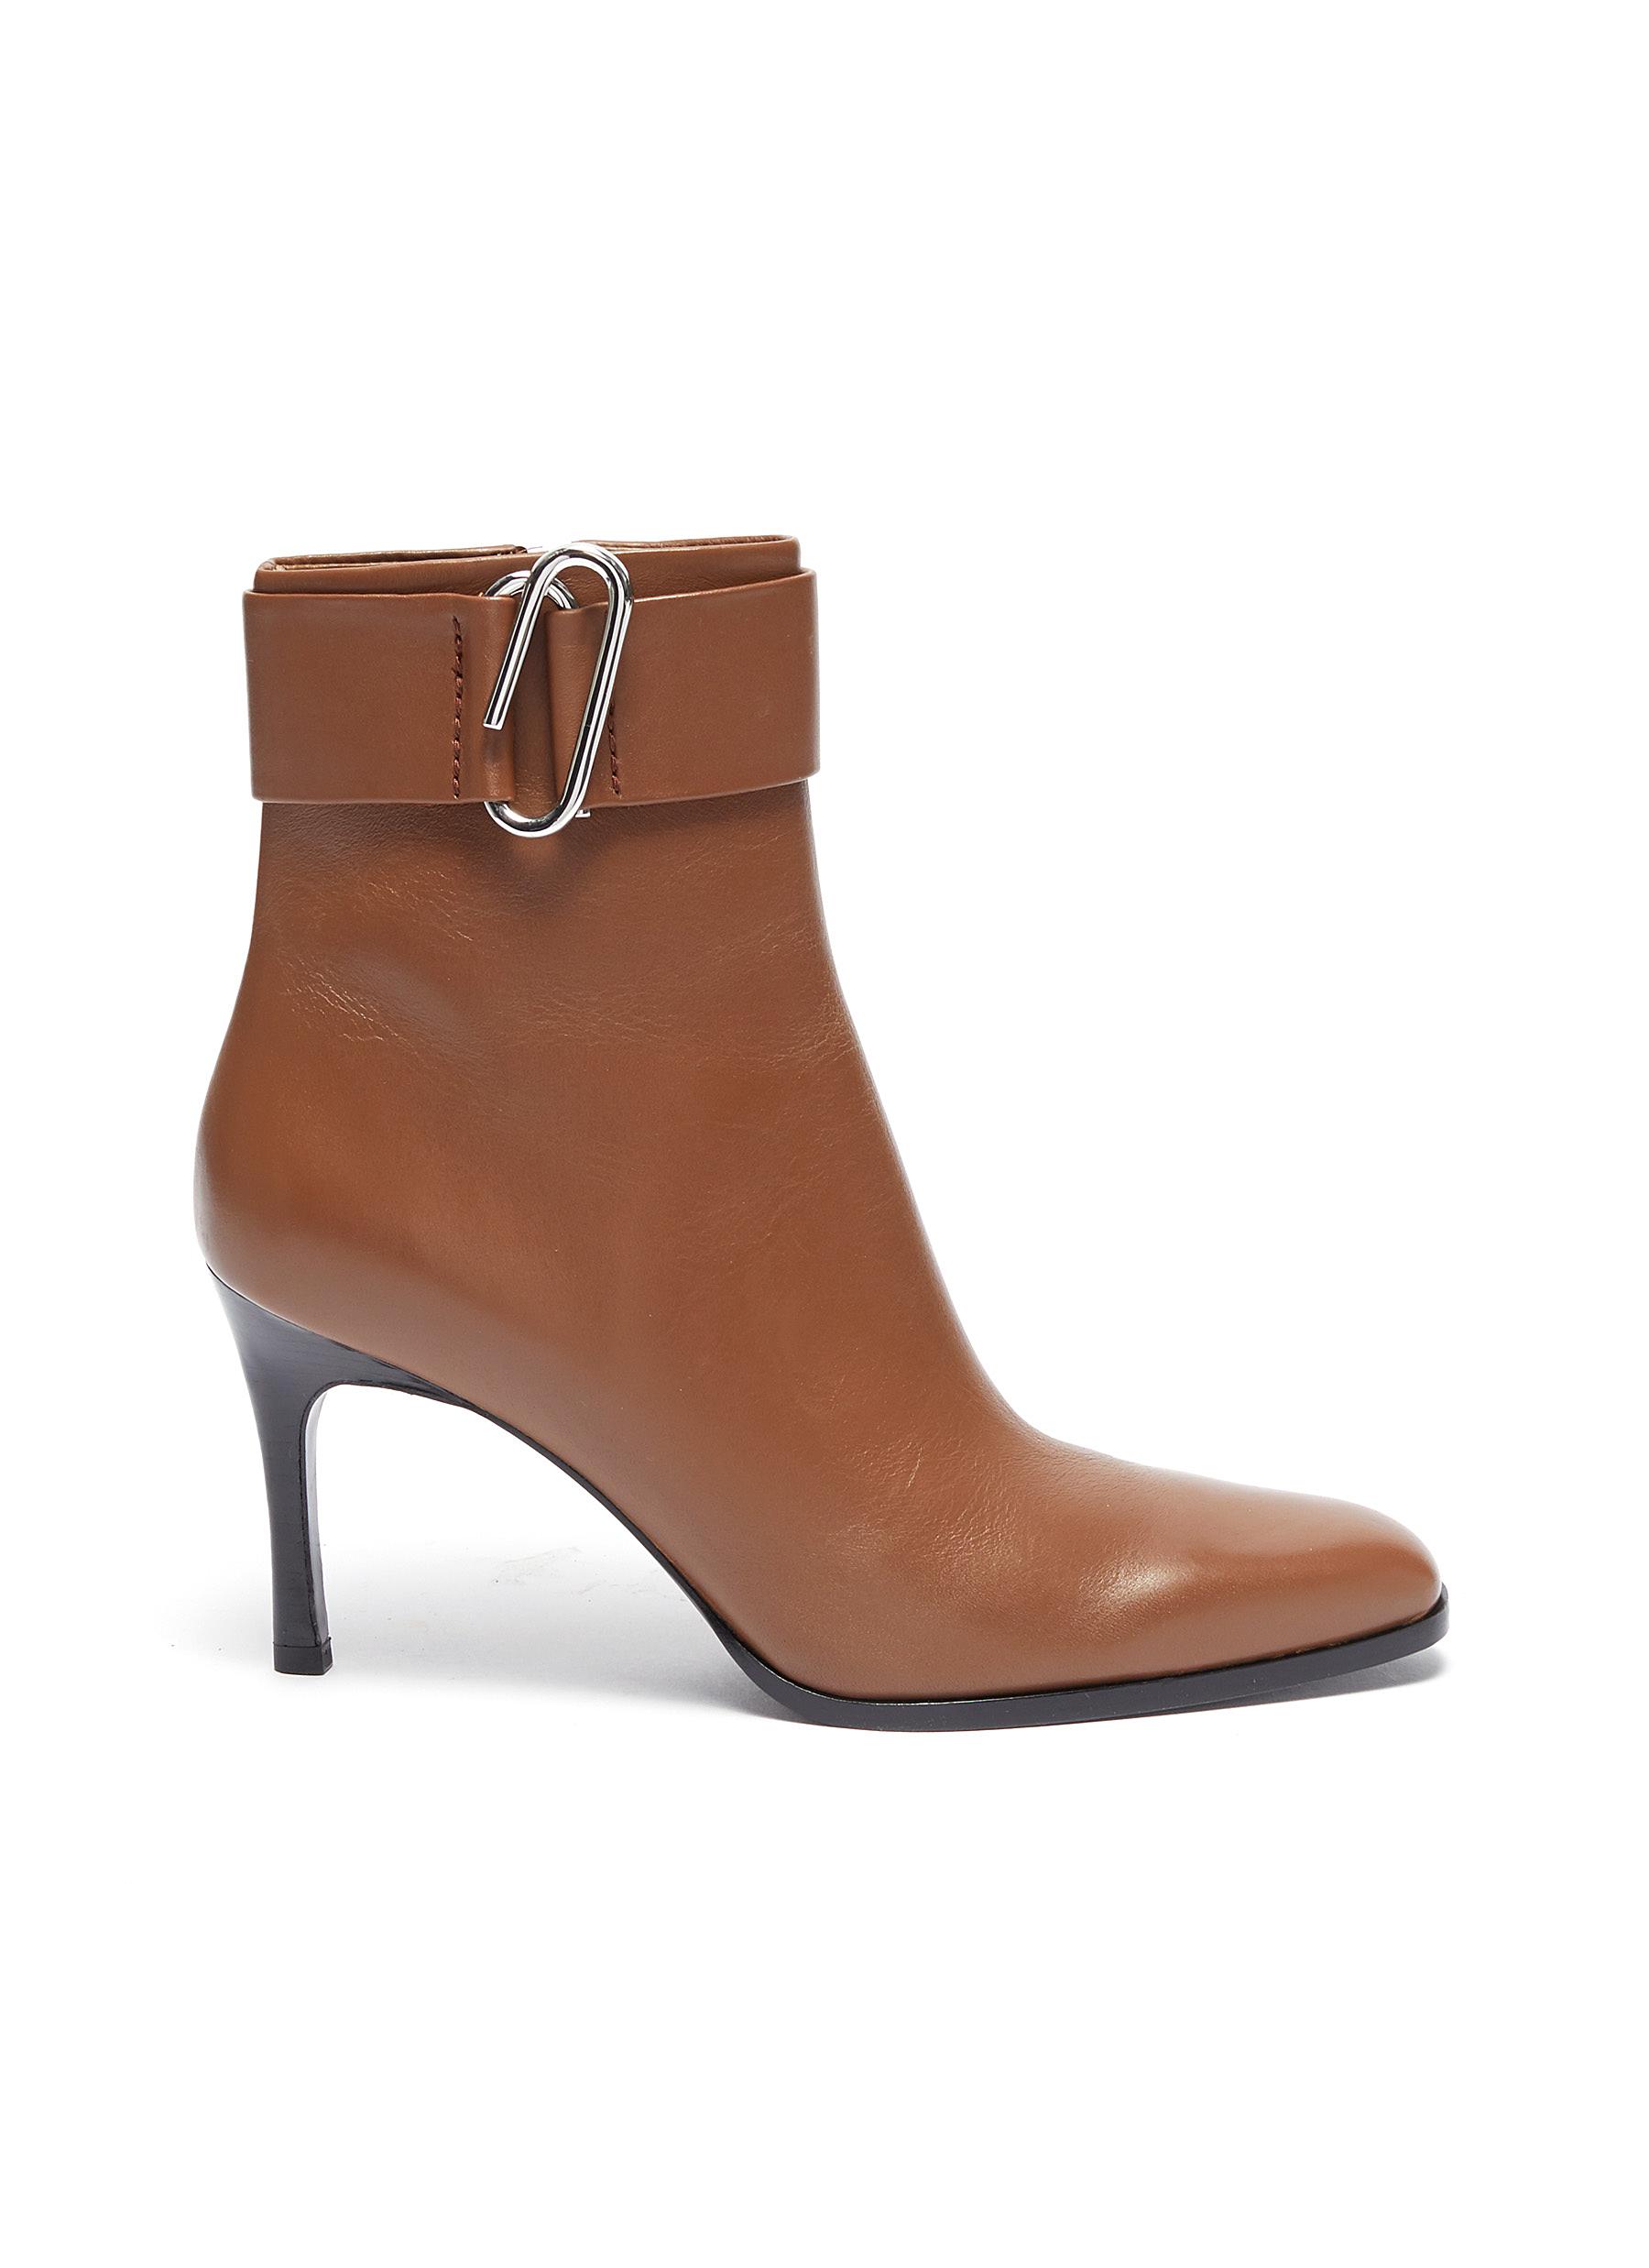 Alix leather ankle boots by 3.1 Phillip Lim